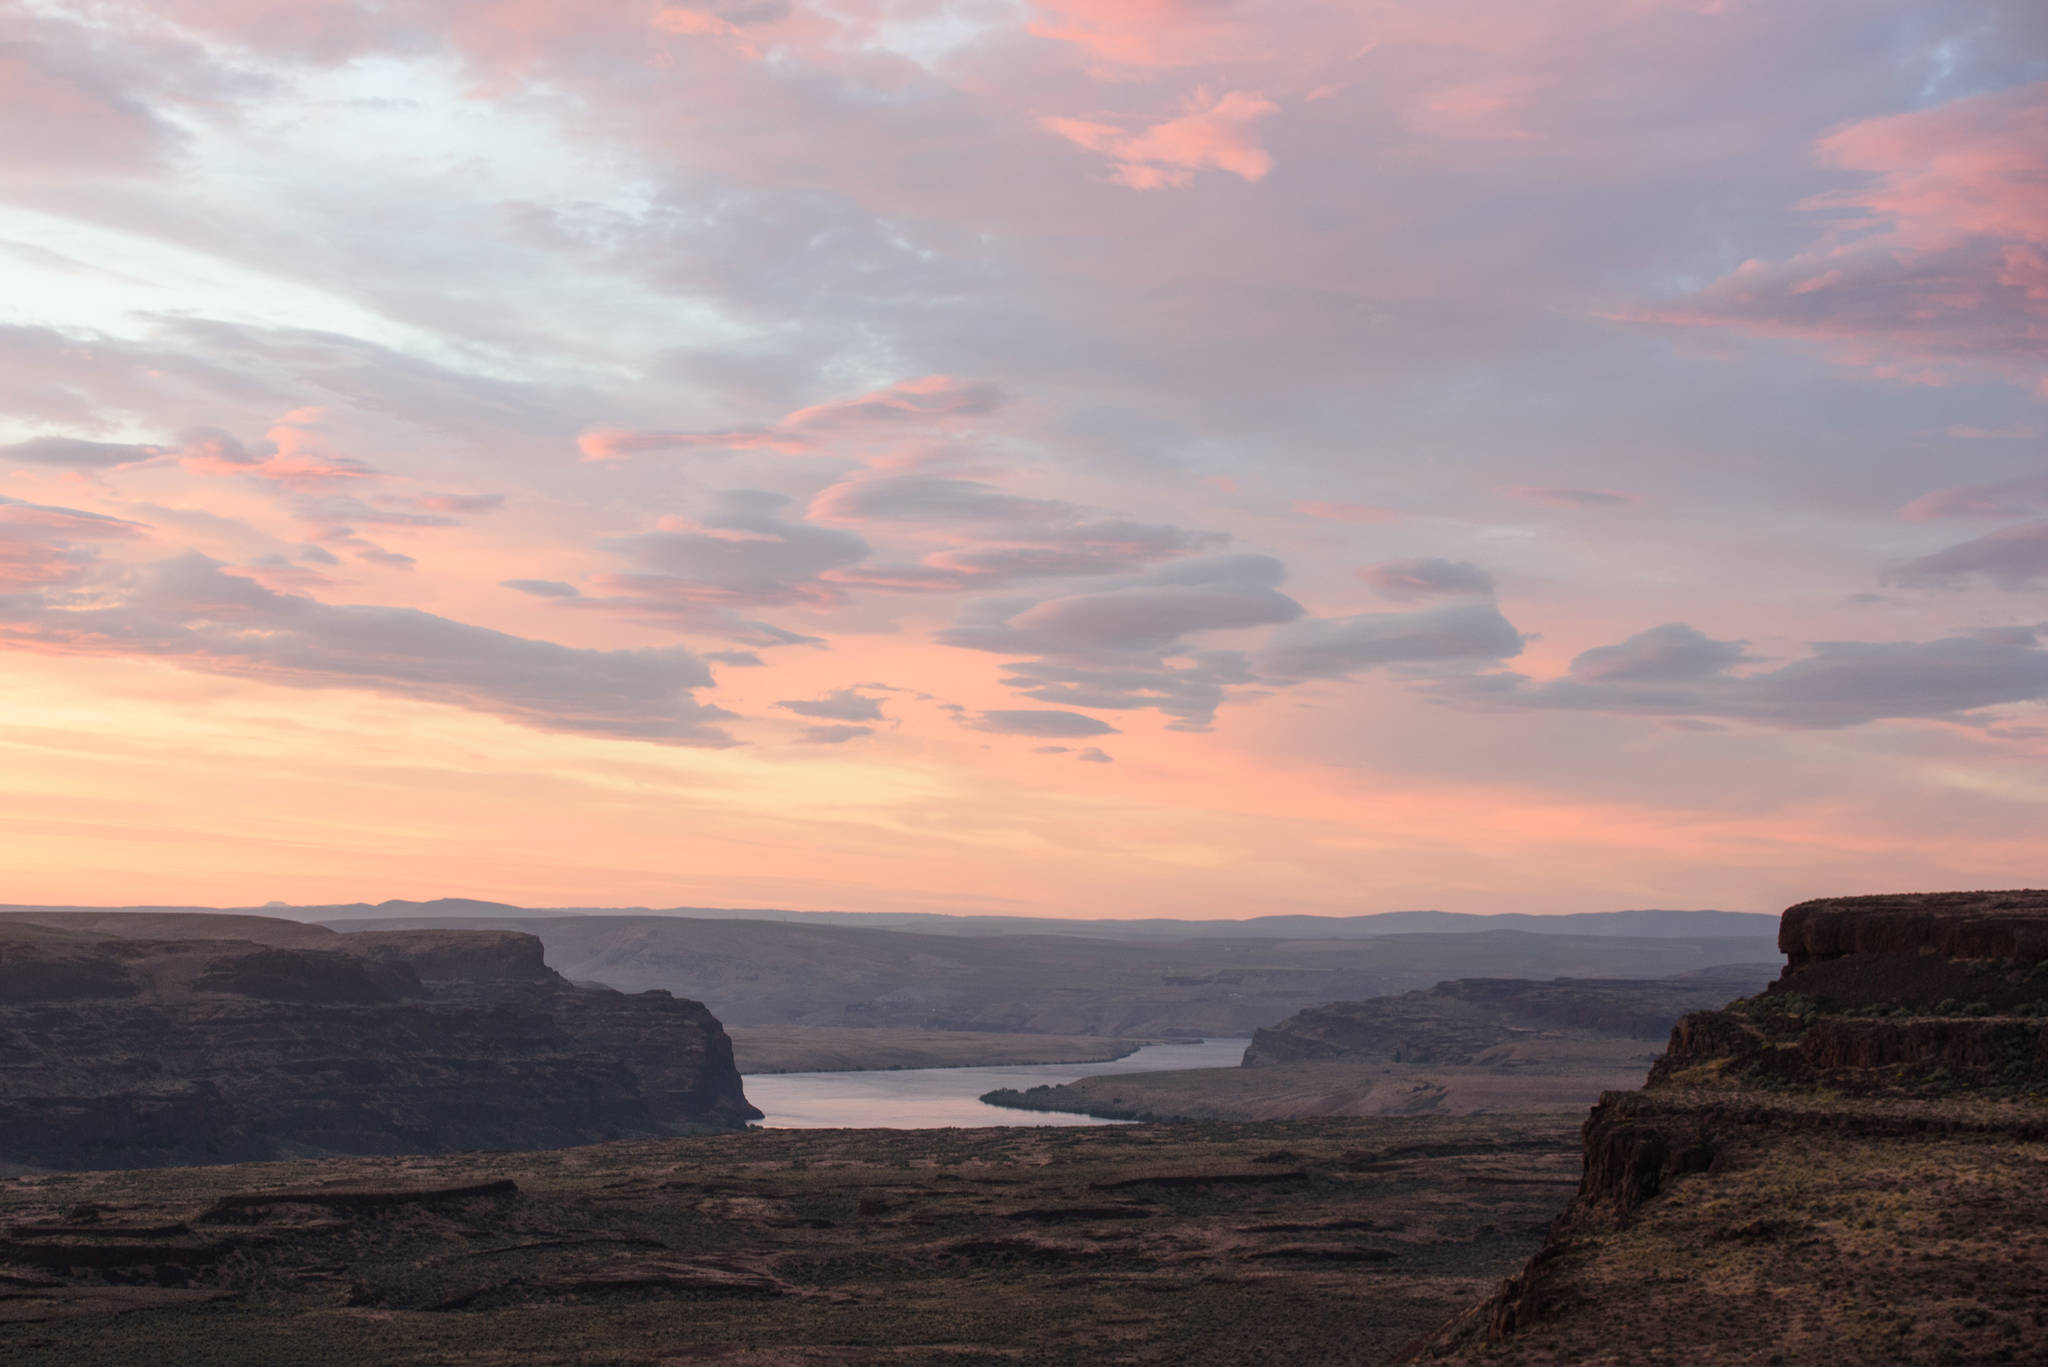 The sunset at the Gorge is &lt;em&gt;pretty okay&lt;/em&gt;, if you’re into that sorta thing.